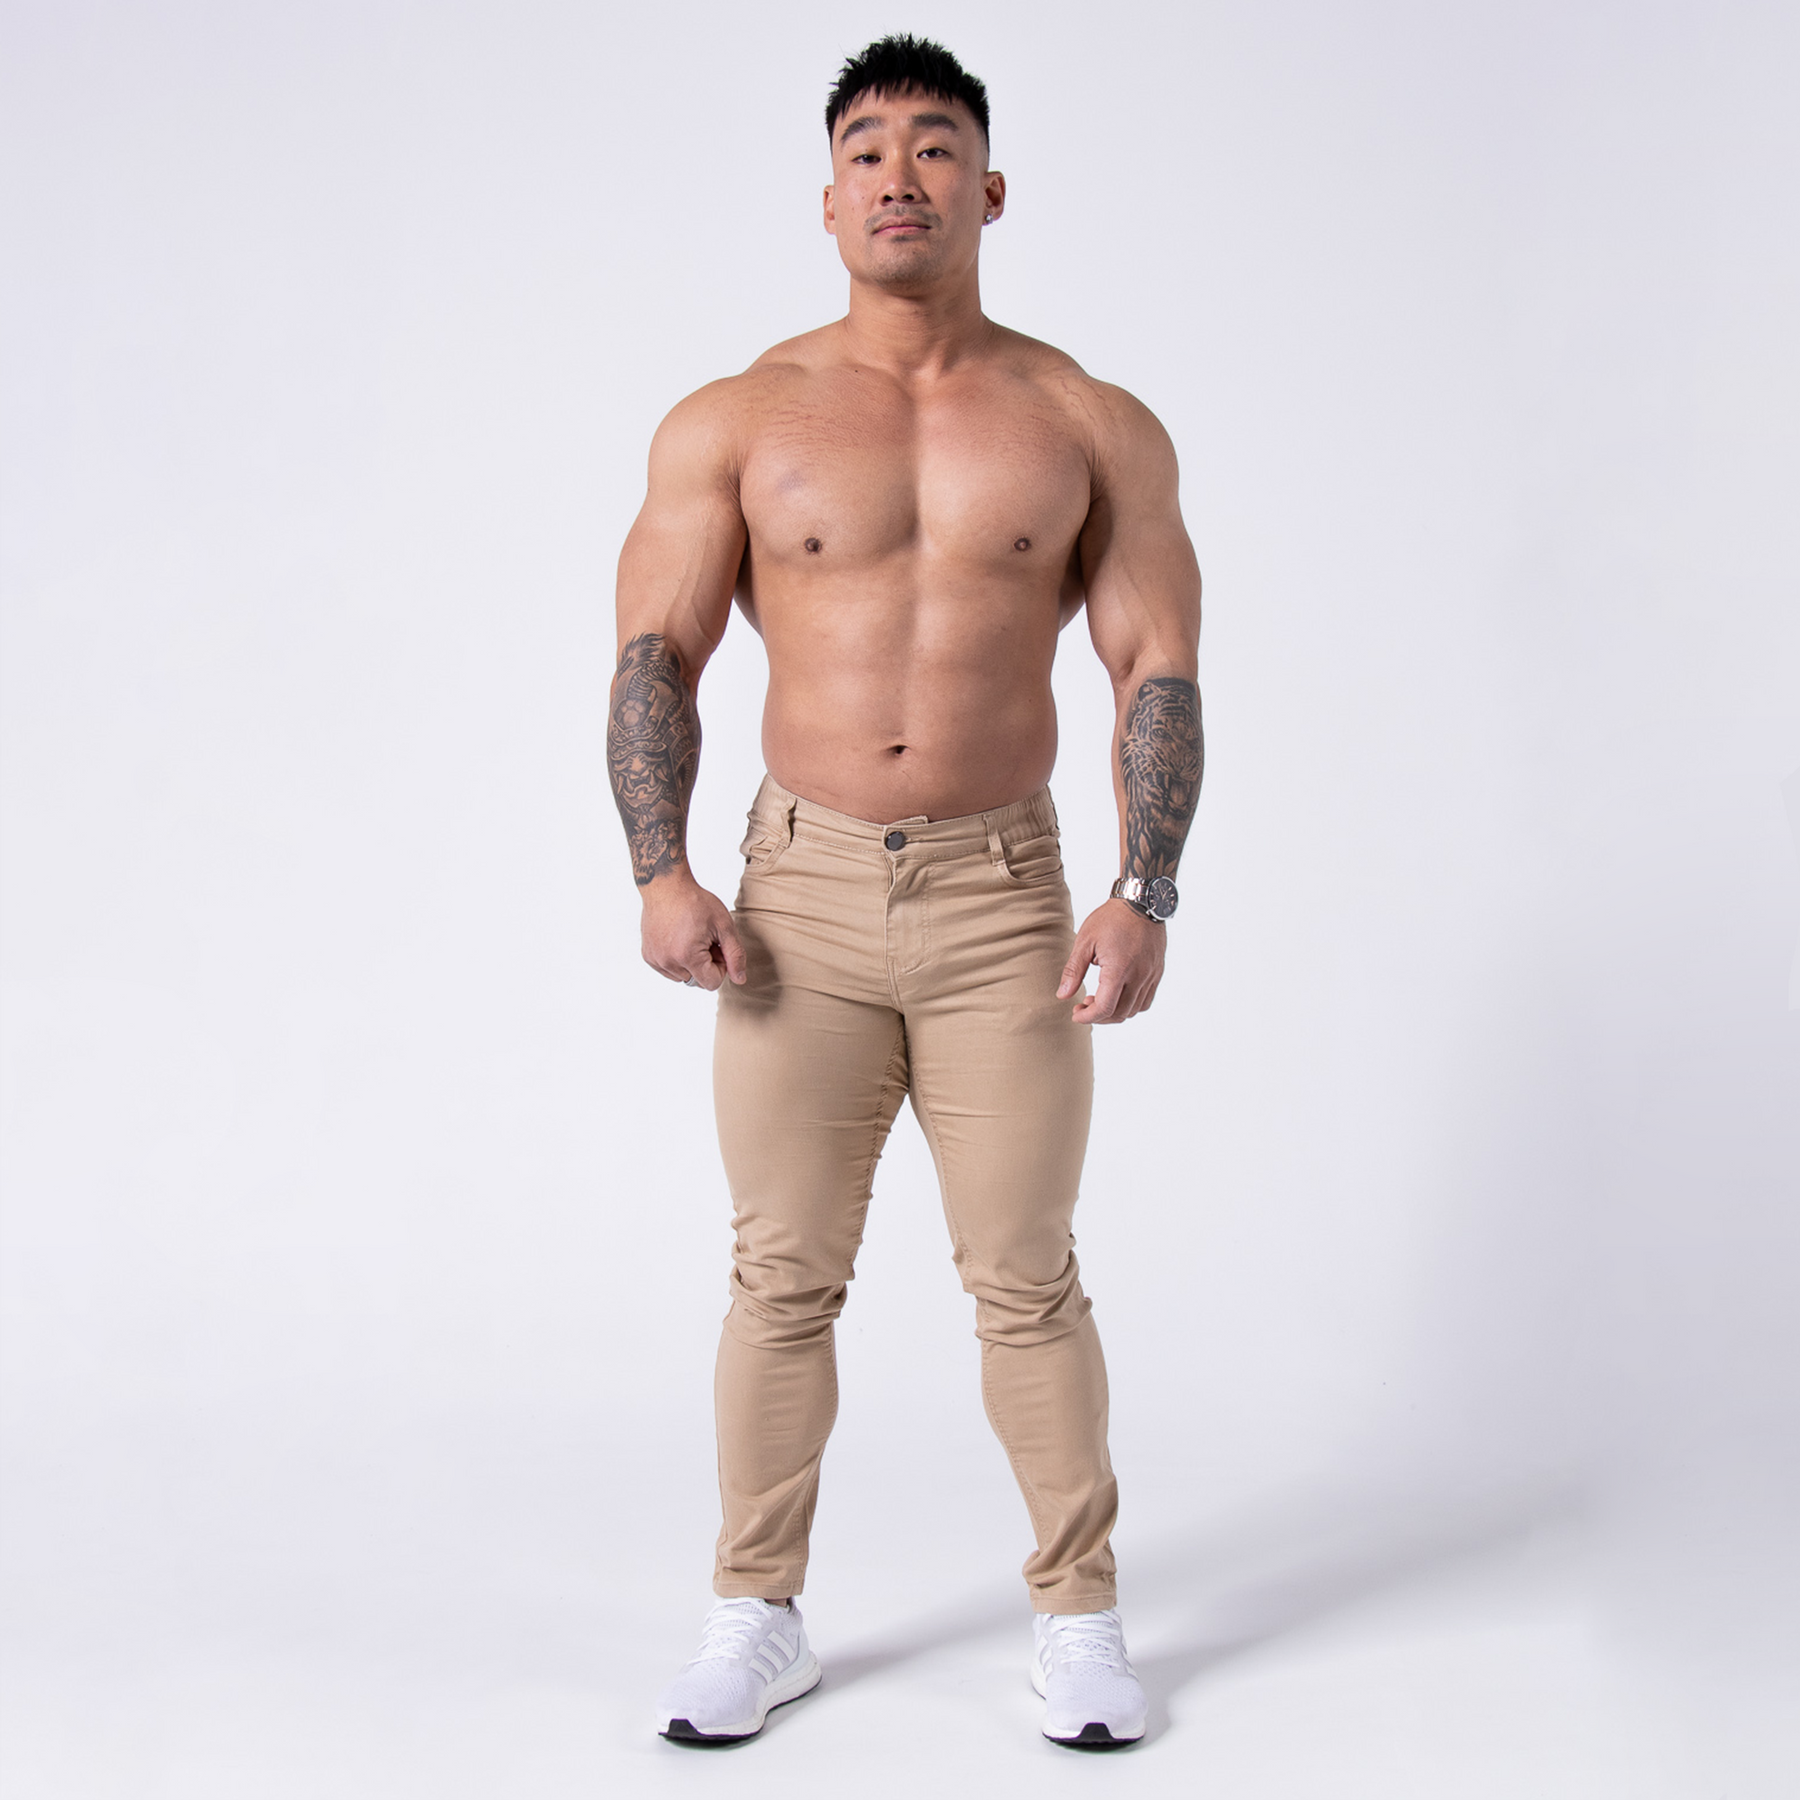 Straight Cut Stretch Jeans - Sand Beige